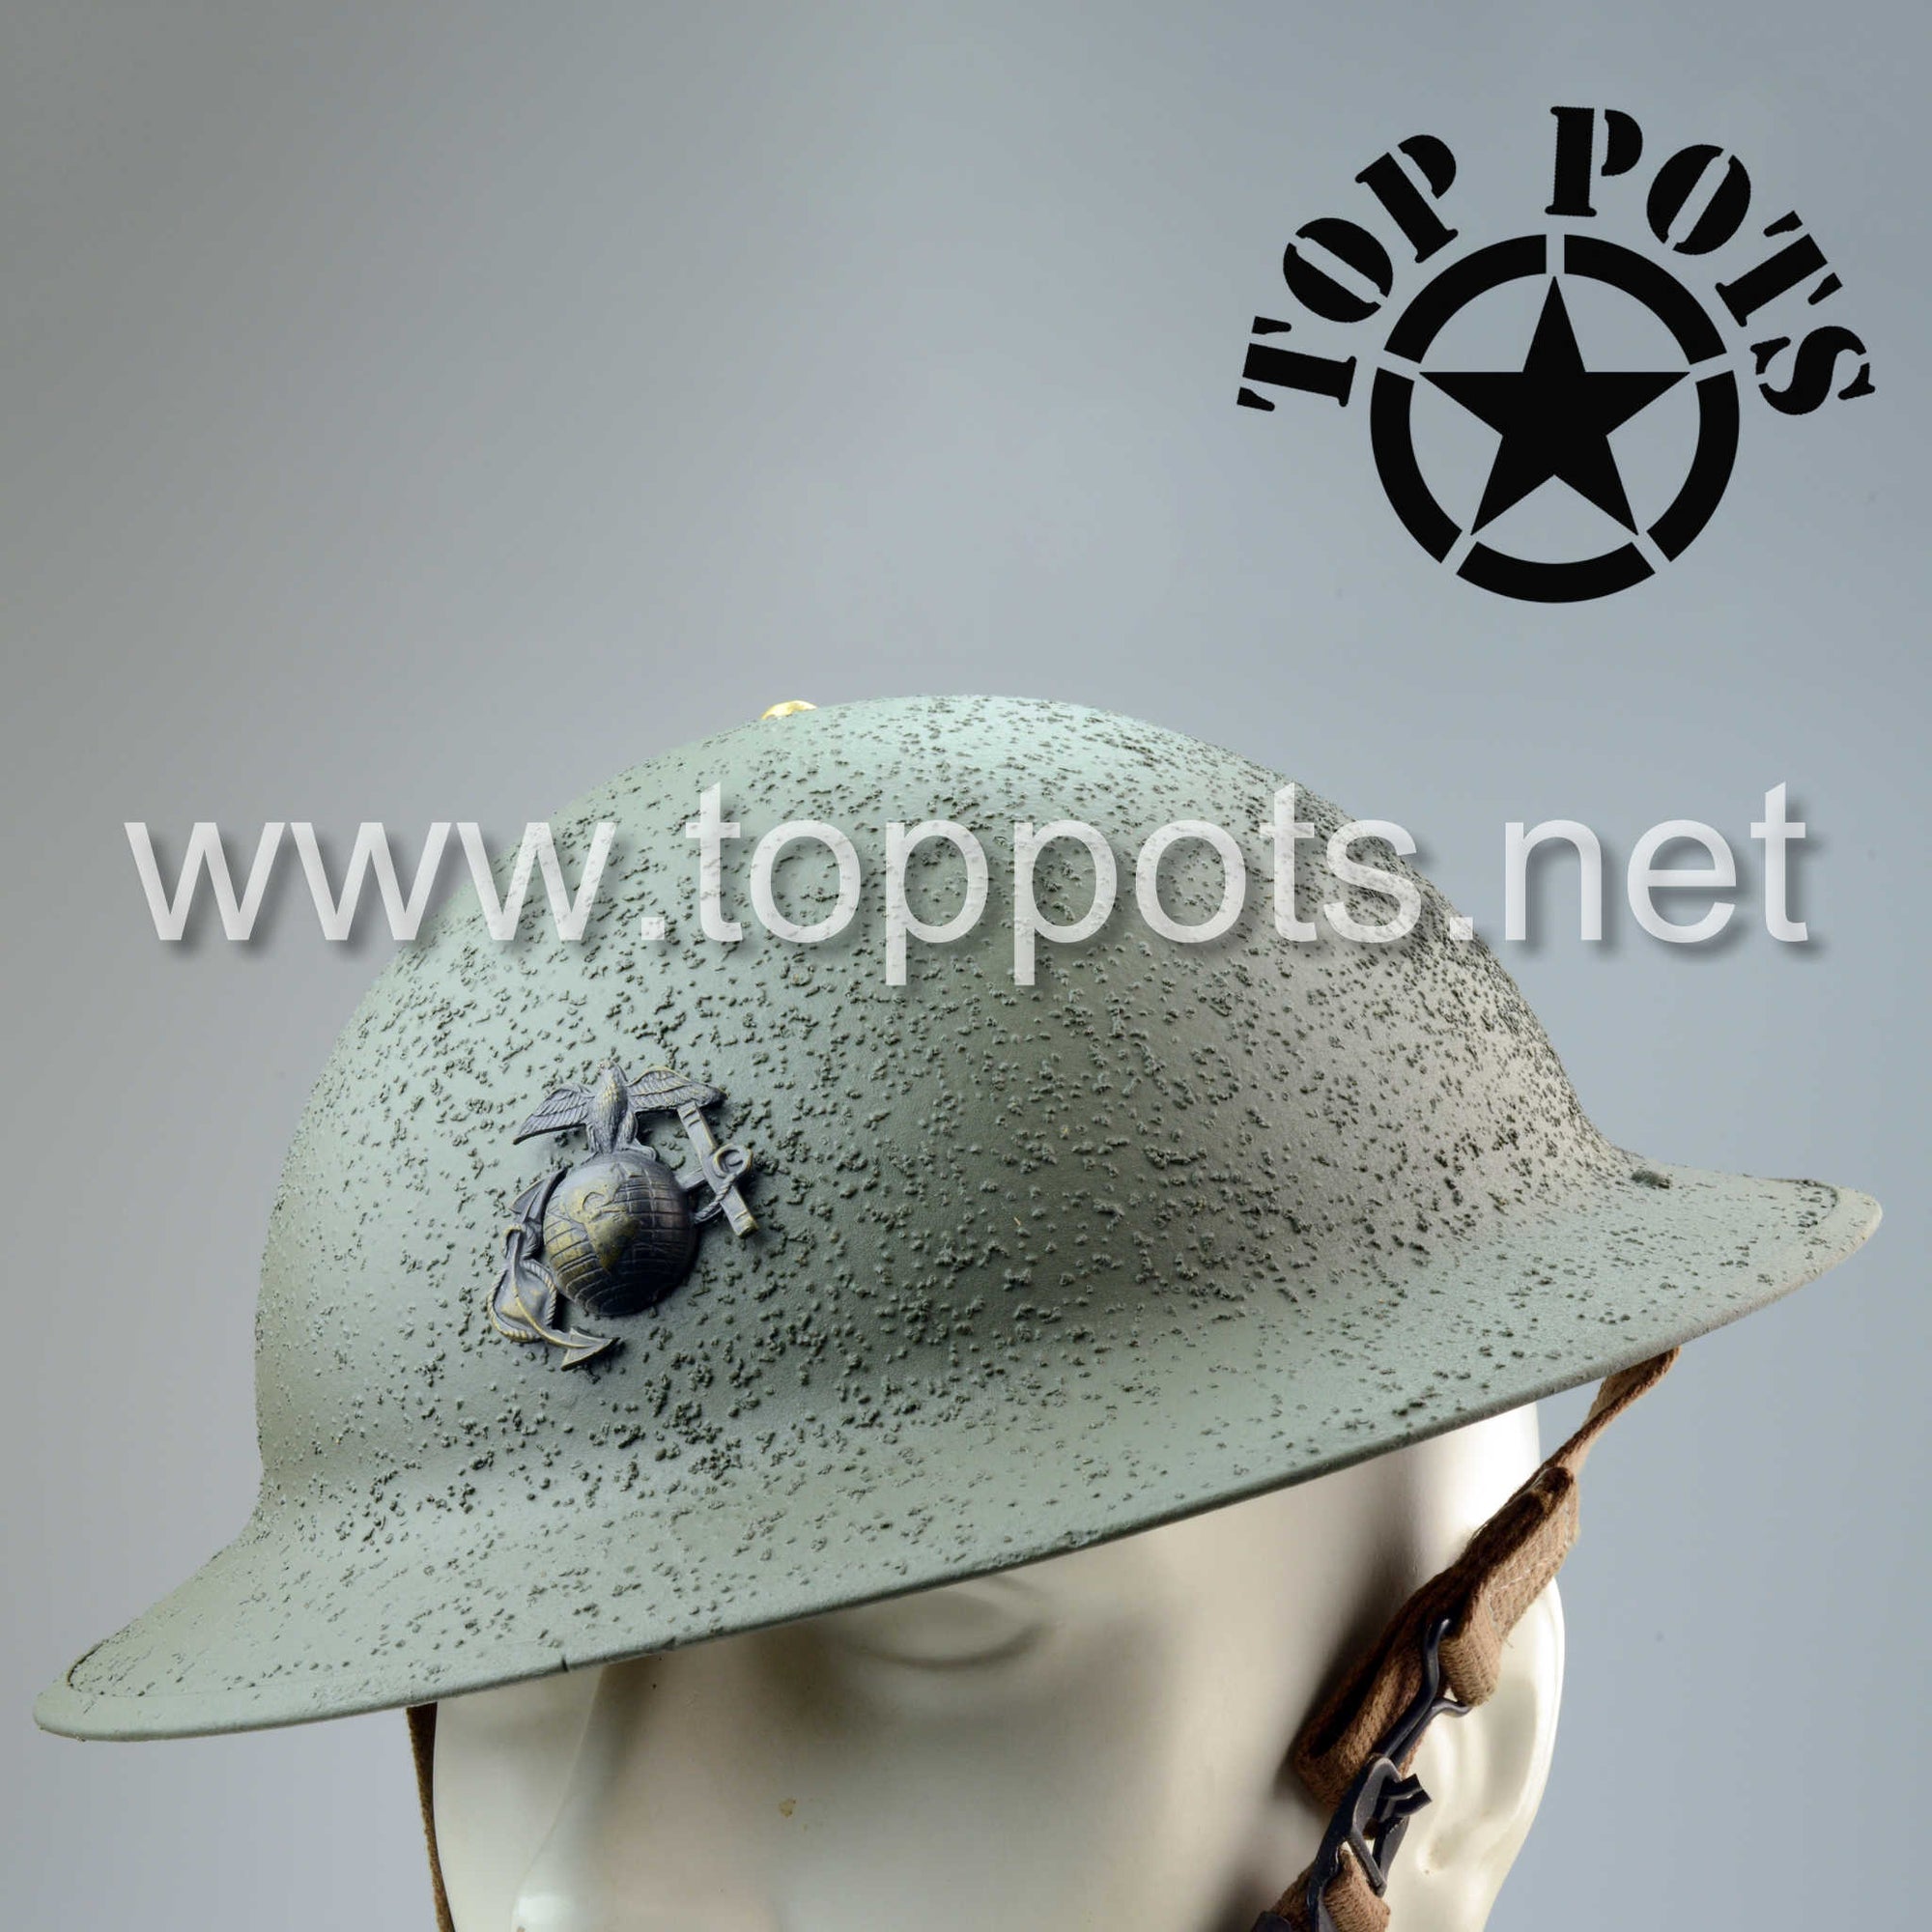 WWII USMC Reproduction Marine Corps M1917 Helmet with Liner and EGA – Textured Finish